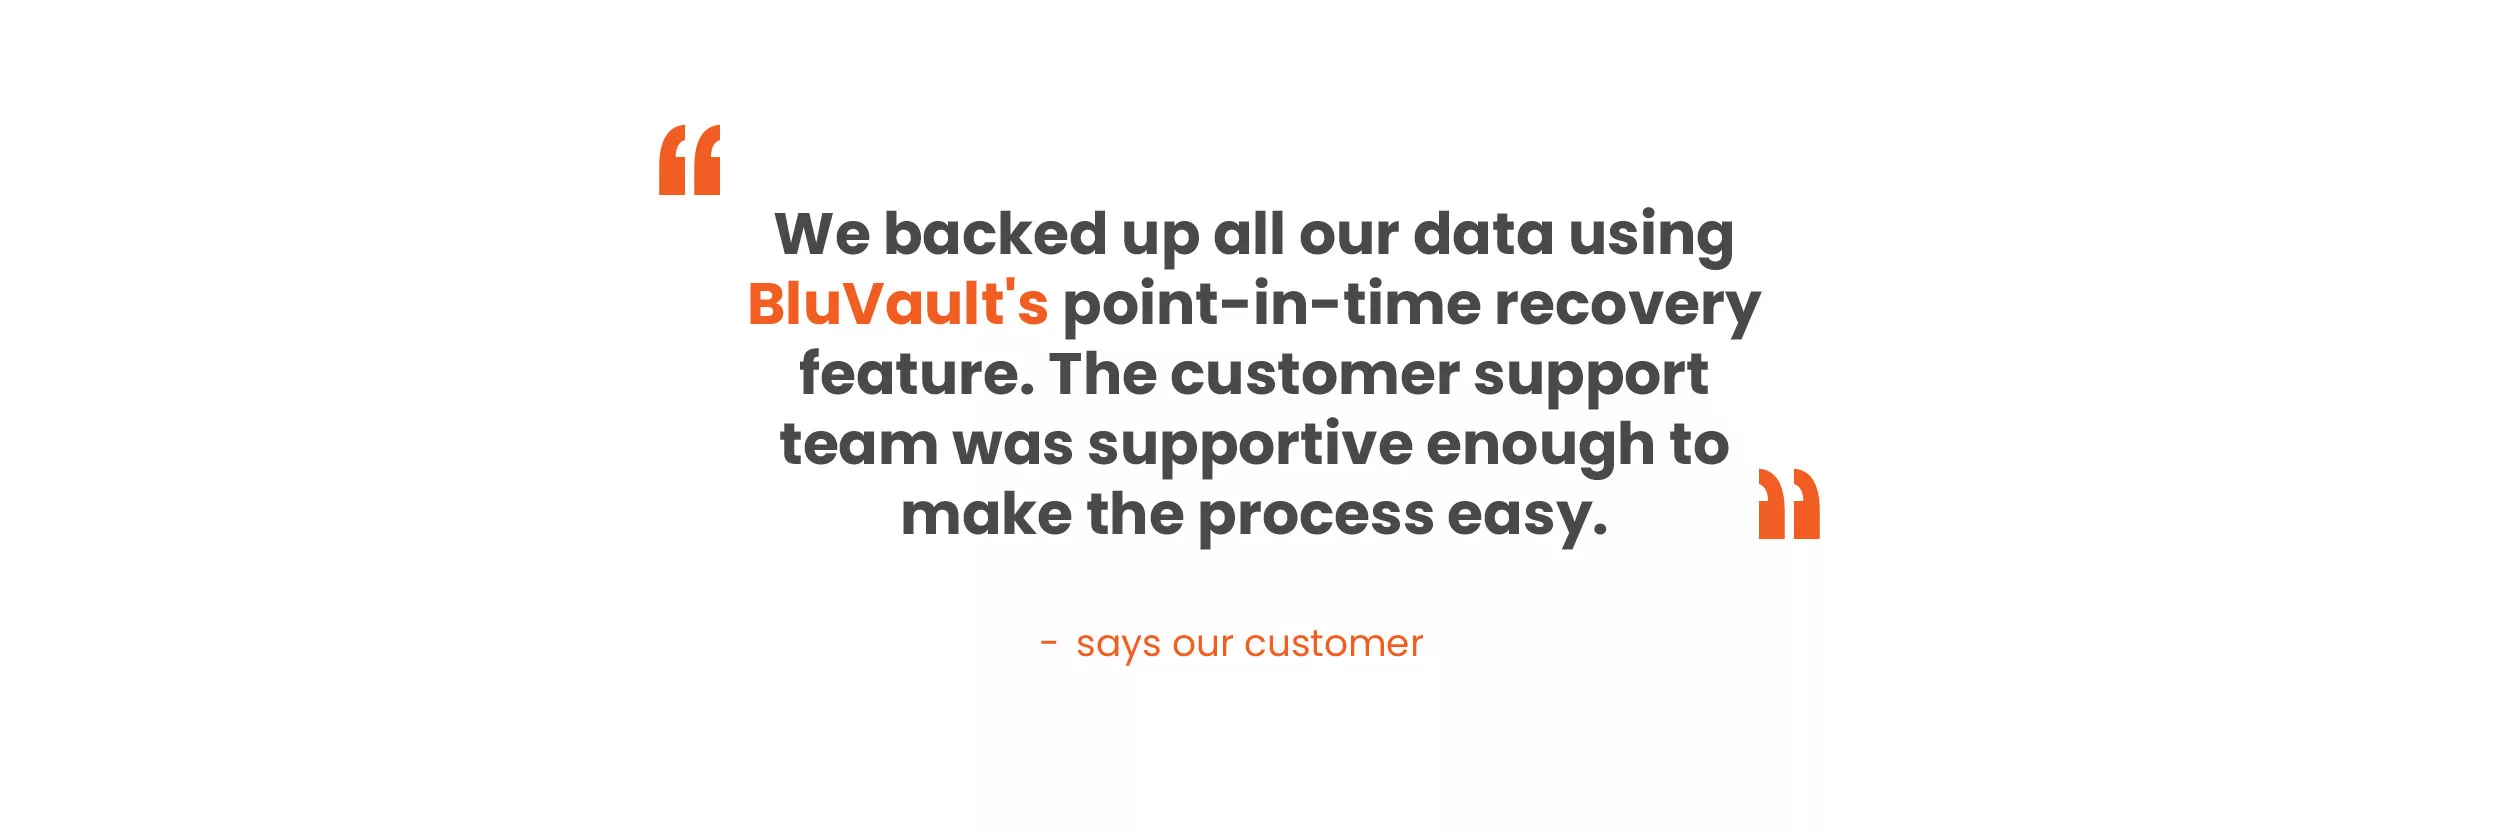 BluVault's point-in-time recovery feature - Data backup